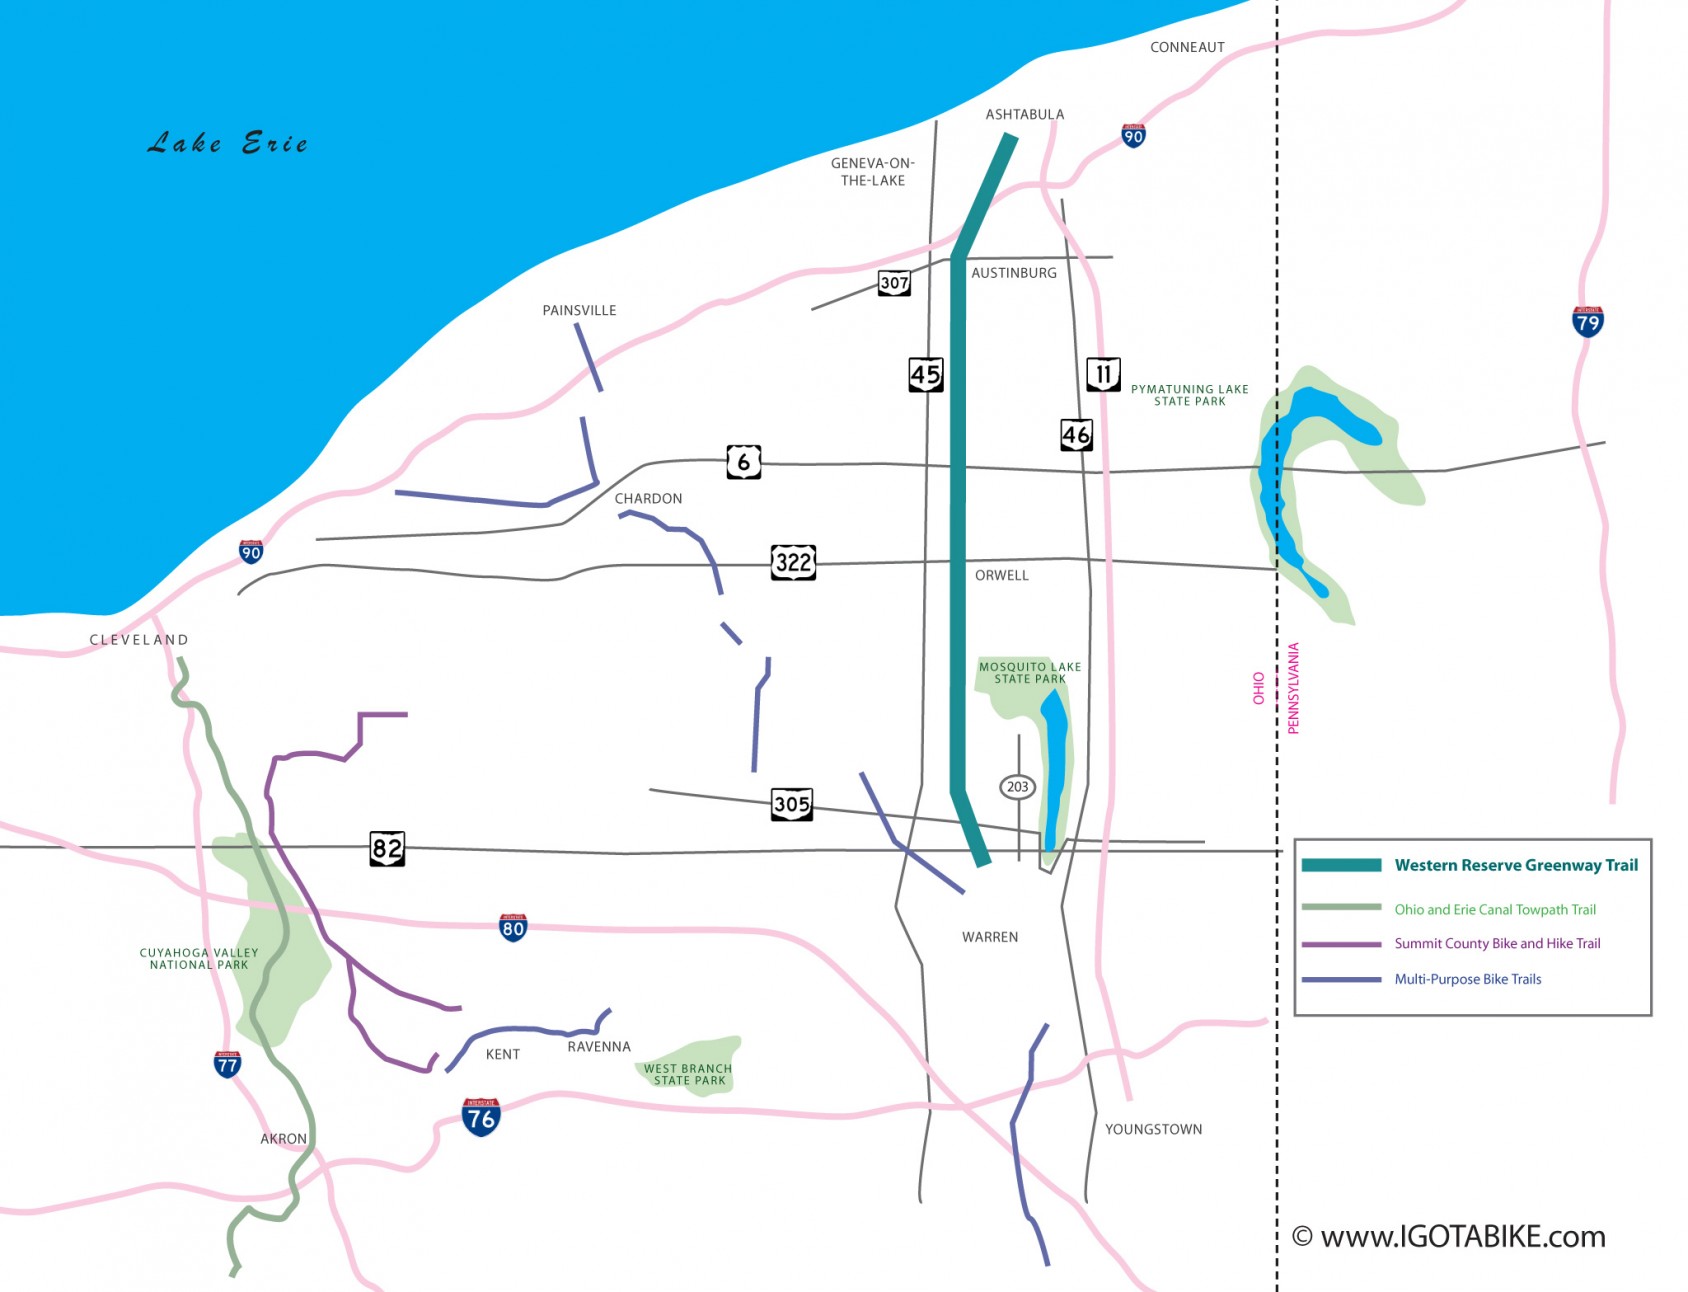 Map for Western Reserve Greenway Overnight Bicycle Trip in Ashtabula and Trumbull Counties